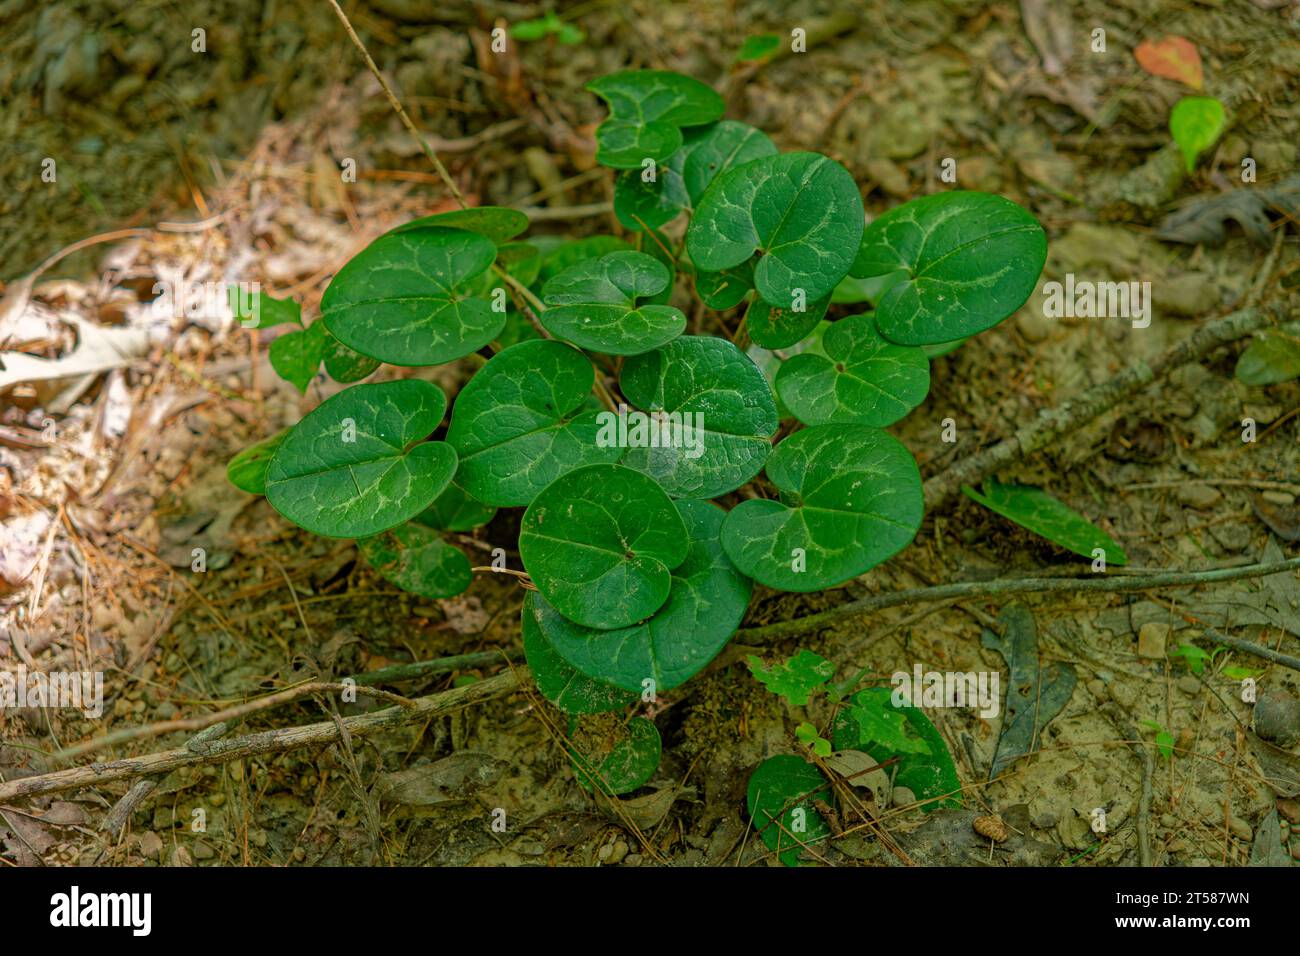 Dwarfflower heartleaf hexastylis know as one of many species of wild ginger a cluster of leaves growing on the ground in the forest in Tennessee in ea Stock Photo